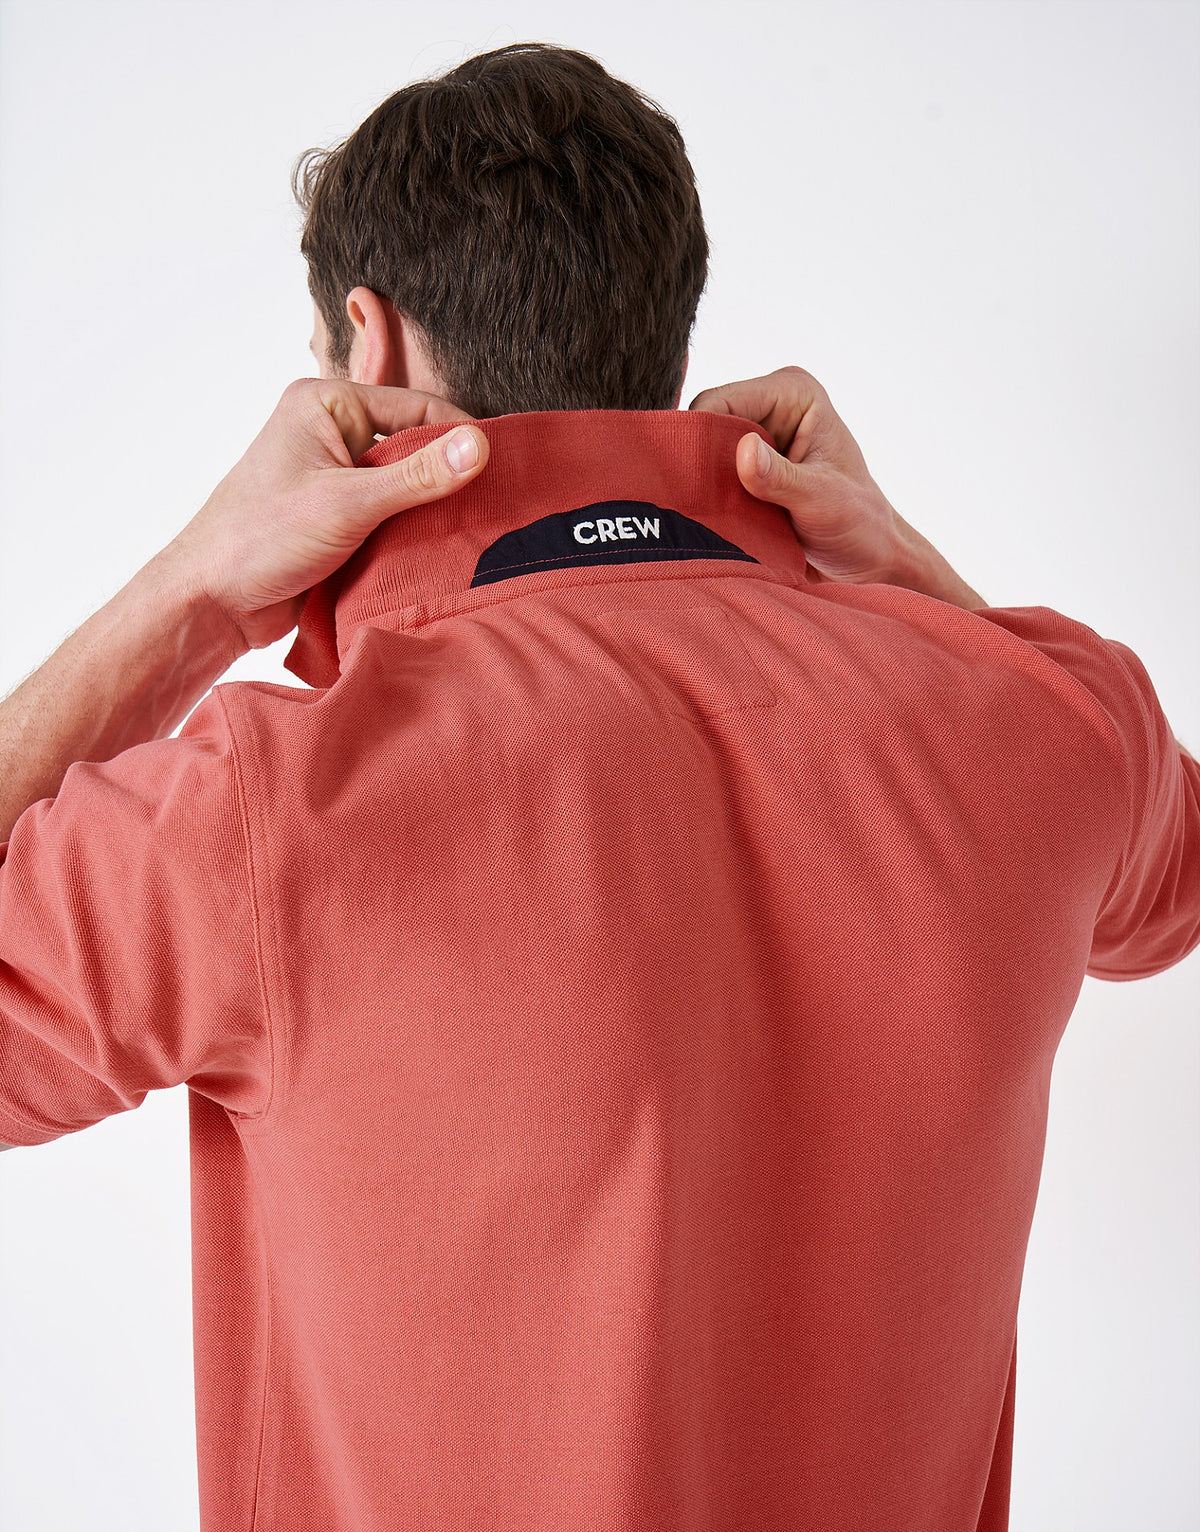 Crew Clothing Mens Pique Polo Shirt 'Classic Pique Polo' - Short Sleeved, 04, Mke002, Spiced Coral